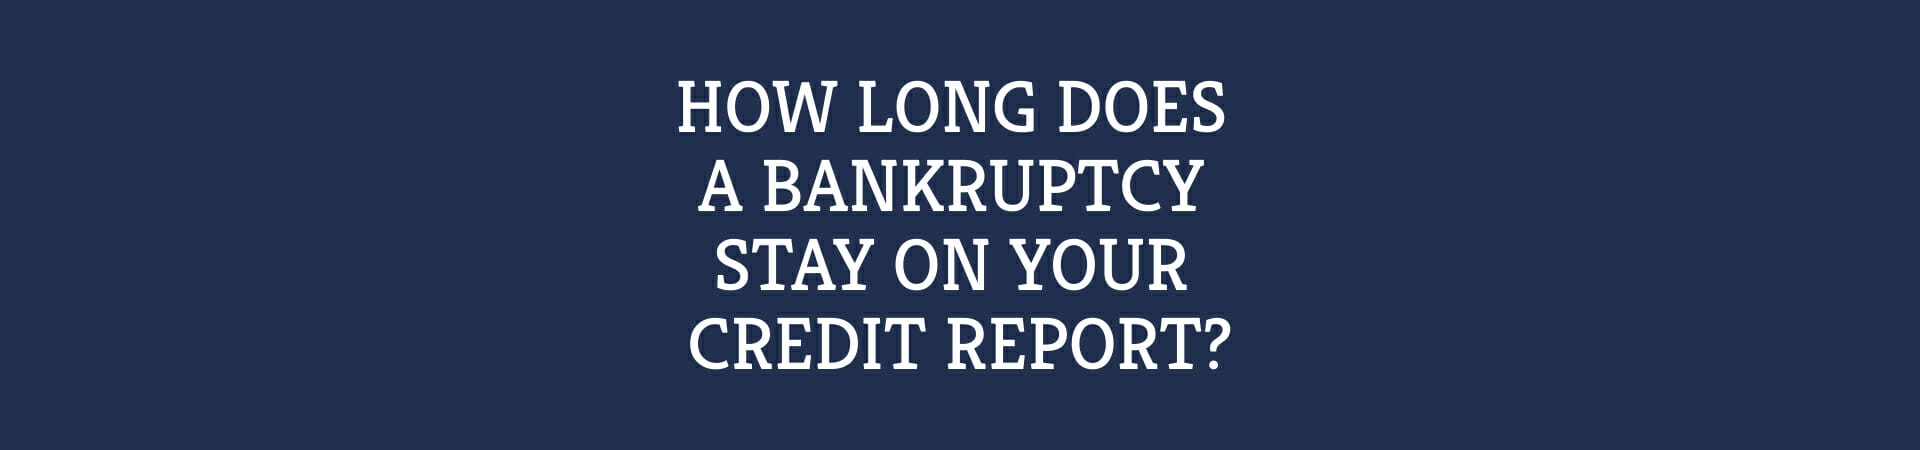 How long does a bankruptcy stay on your credit report?